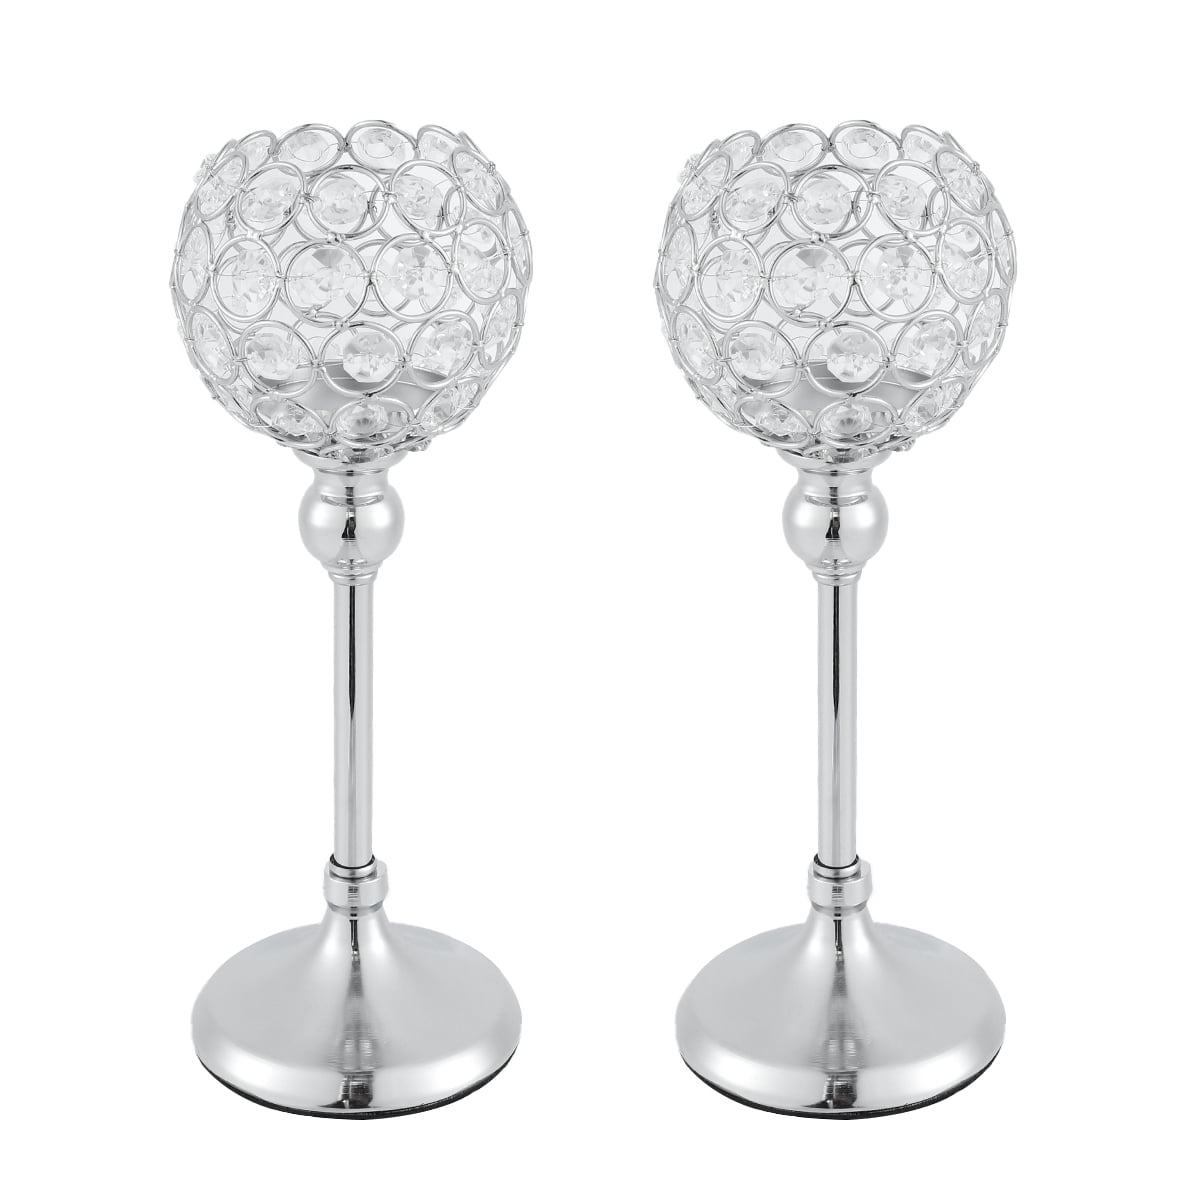 Candle Holders Set of 2,Candle Holder for Wedding,Candle Holders for Table Centerpiece,Crystal Candle Holders for Coffee Table Home Anniversary Celebration Birthday Party Holiday Housewarming Gifts